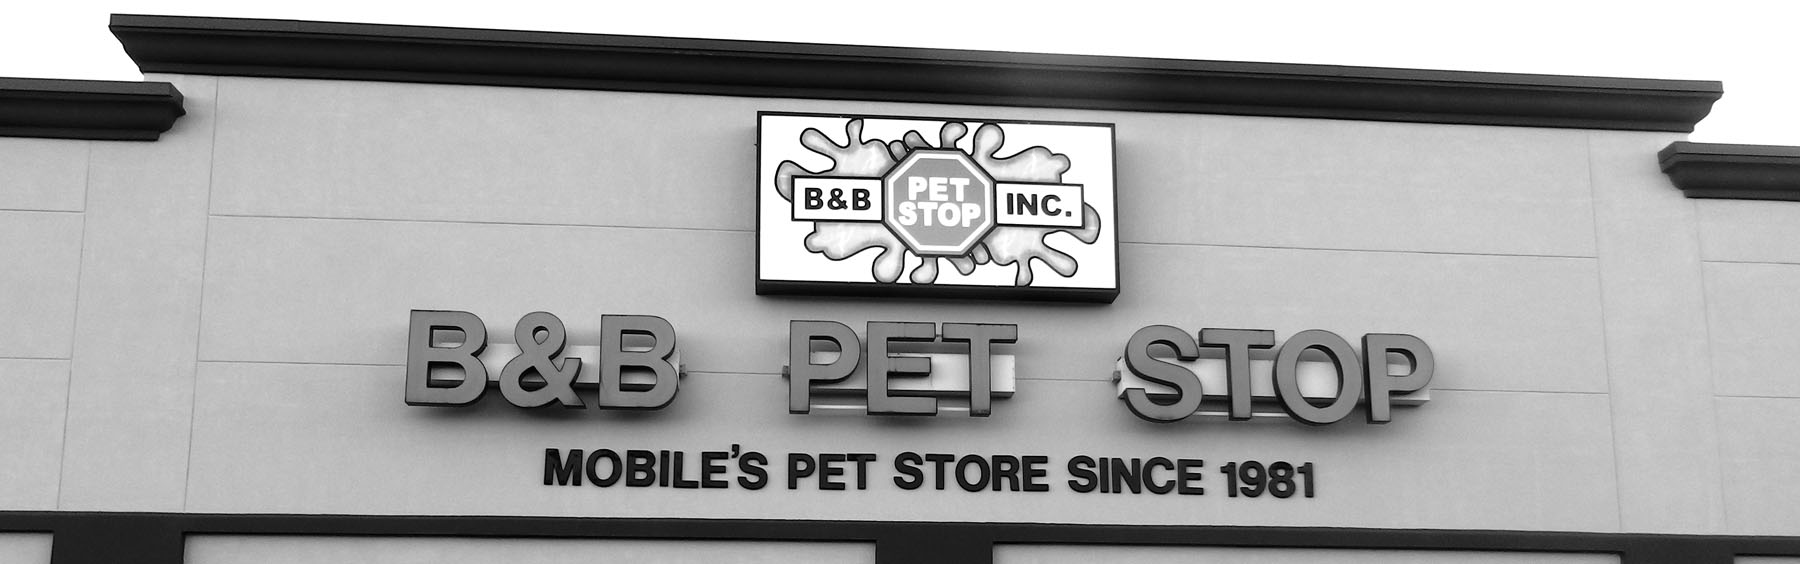 View of B&B Pet Stop store front